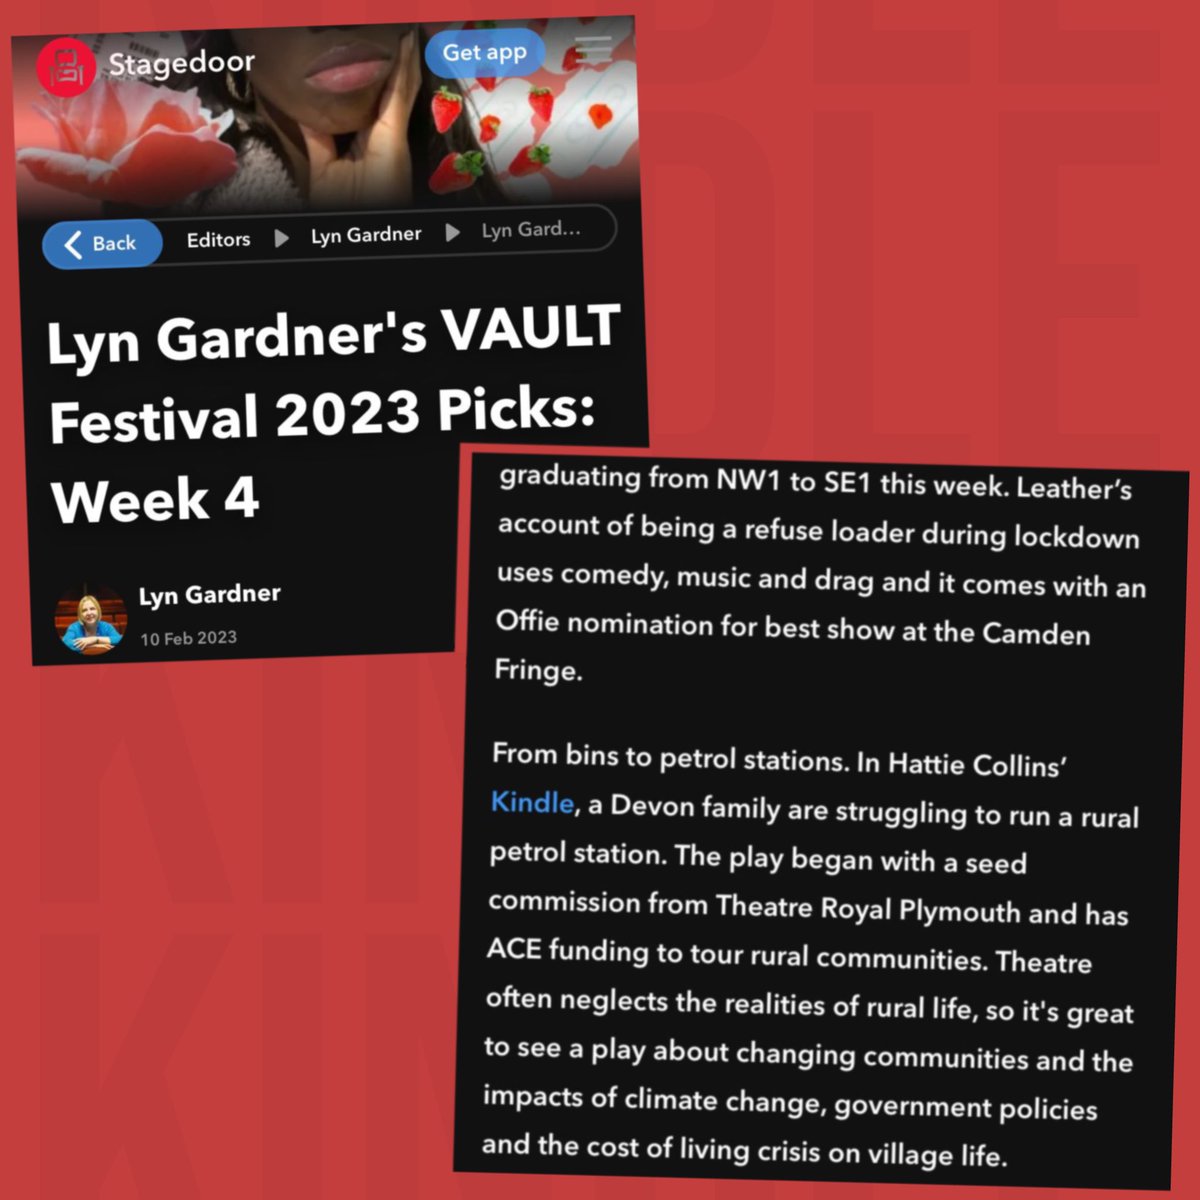 Woooo 3 days to go & Kindle is one of the @VAULTFestival wk 4 shows to catch @lyngardner‘s attention! We’d love our debut in London & #vaultfestival to be a packed one come come come! See our new play straight out of Devon: vaultfestival.com/events/kindle/ 👉 stagedoorapp.com/lyn-gardner/ly…